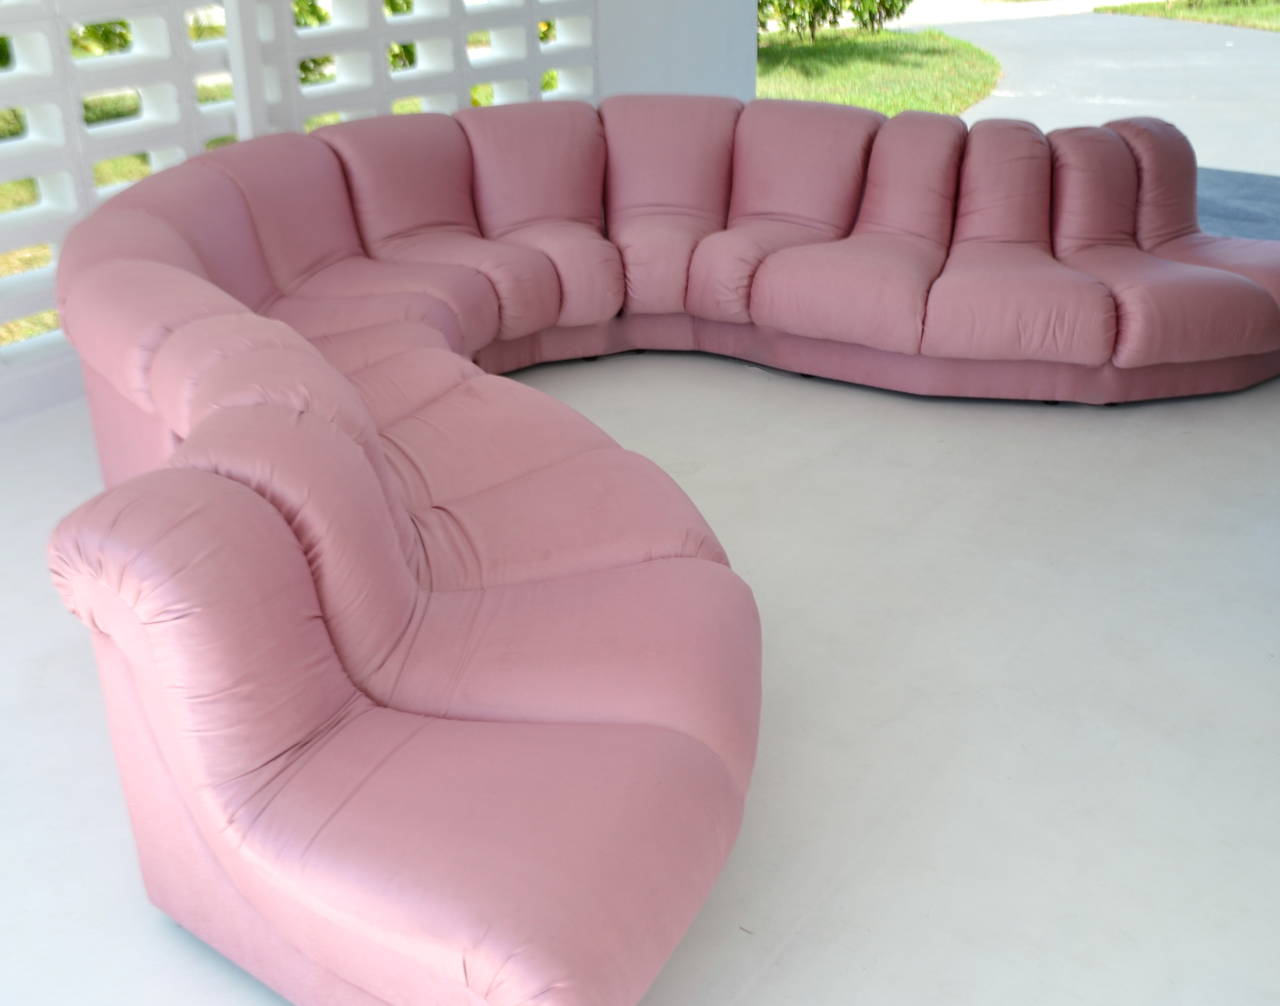 Exceptional eight-piece Post Modern sectional sofa by Preview Furniture Corporation, circa 1988. This glamorous sculptural modular sofa in the style of de Sede DS 600 Non Stop sectional Snake sofa, consisting of four convex and four concave curving